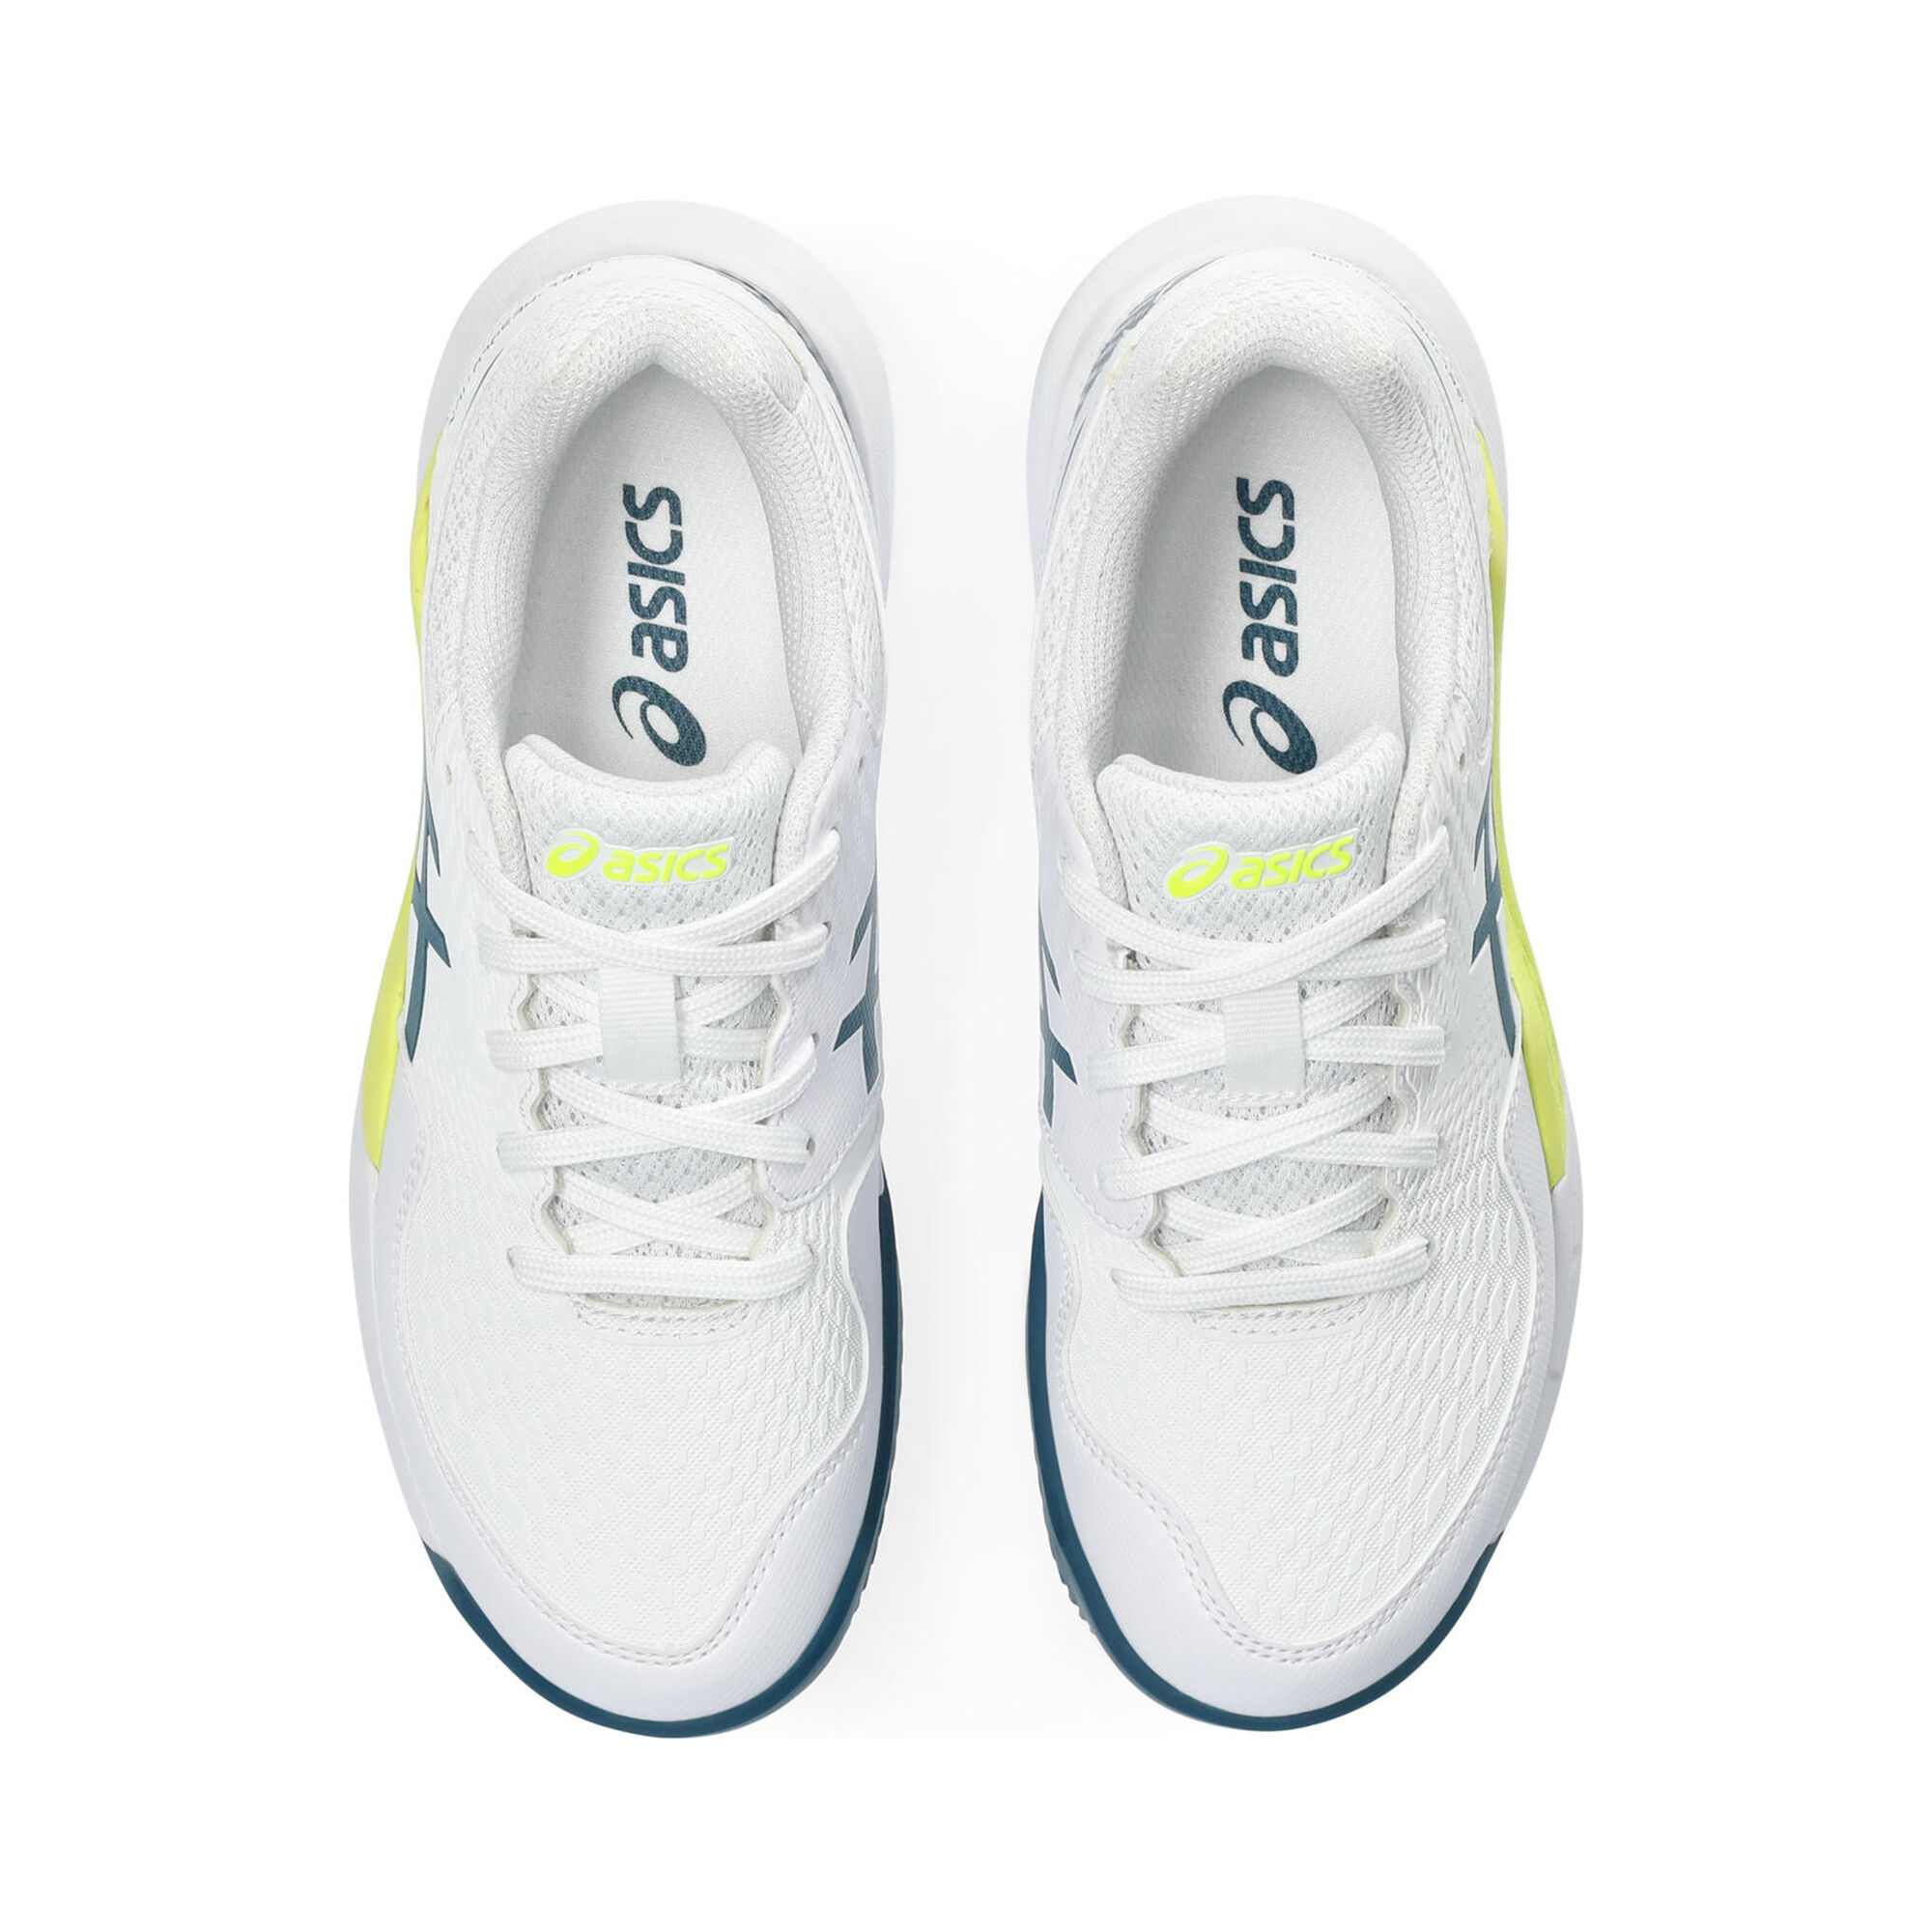 ASICS teams up with BOSS to launch limited edition Gel-Resolution 9  trainers